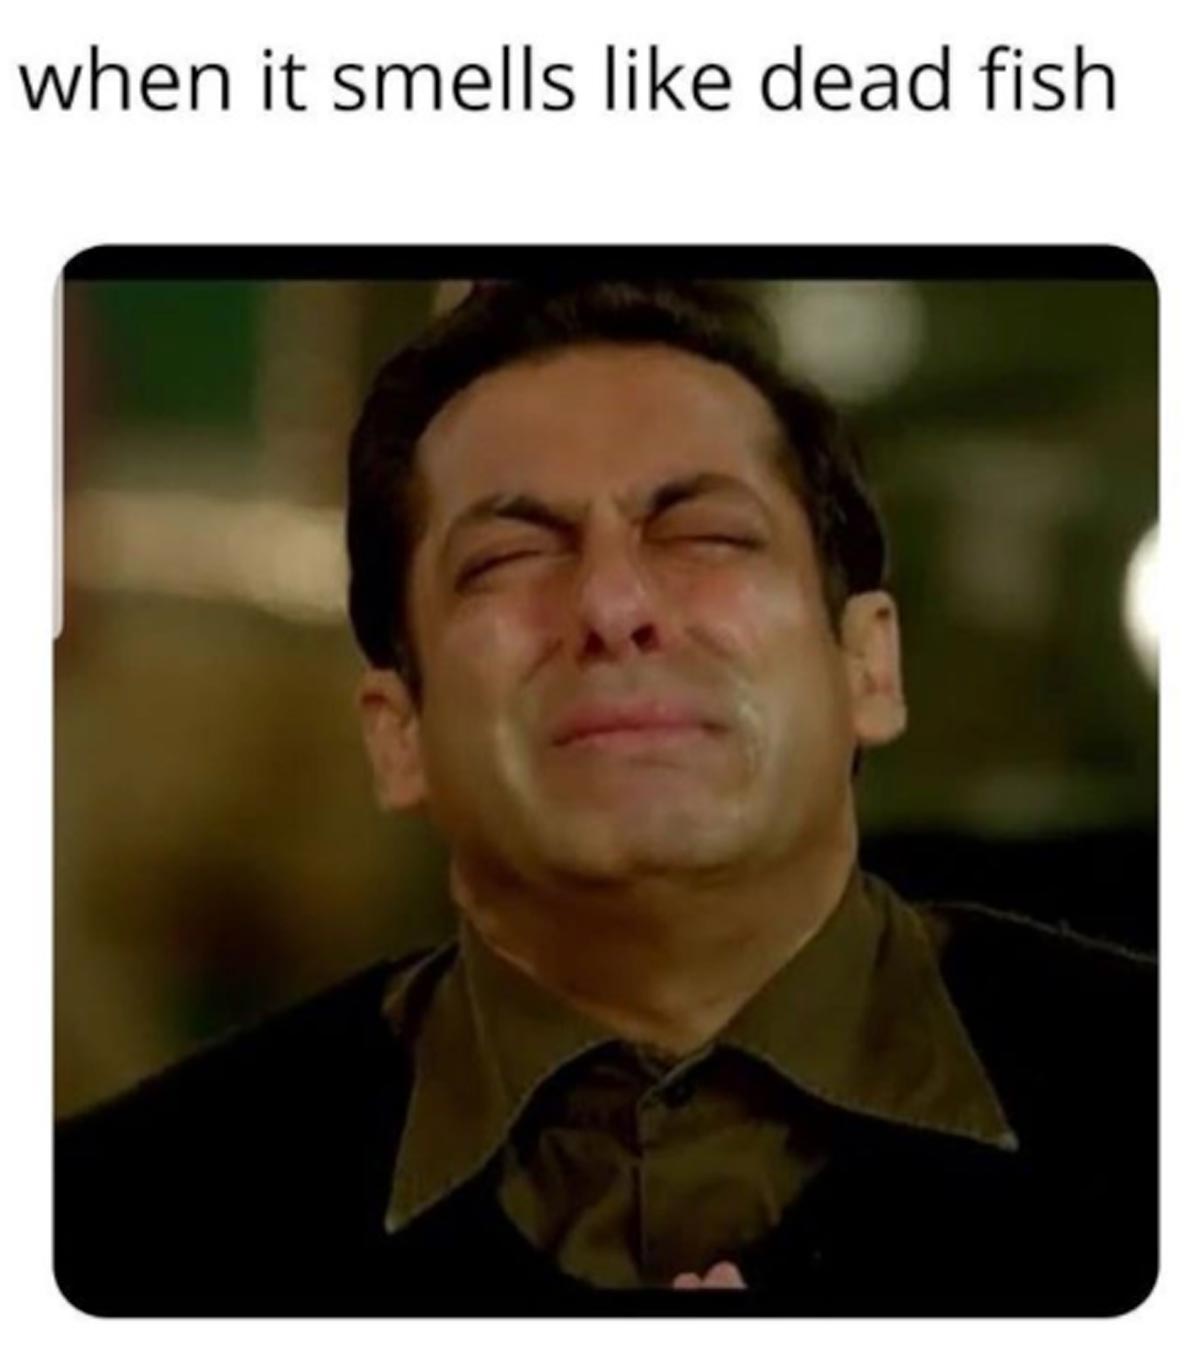 funny sex memes - worst actor of bollywood - when it smells dead fish